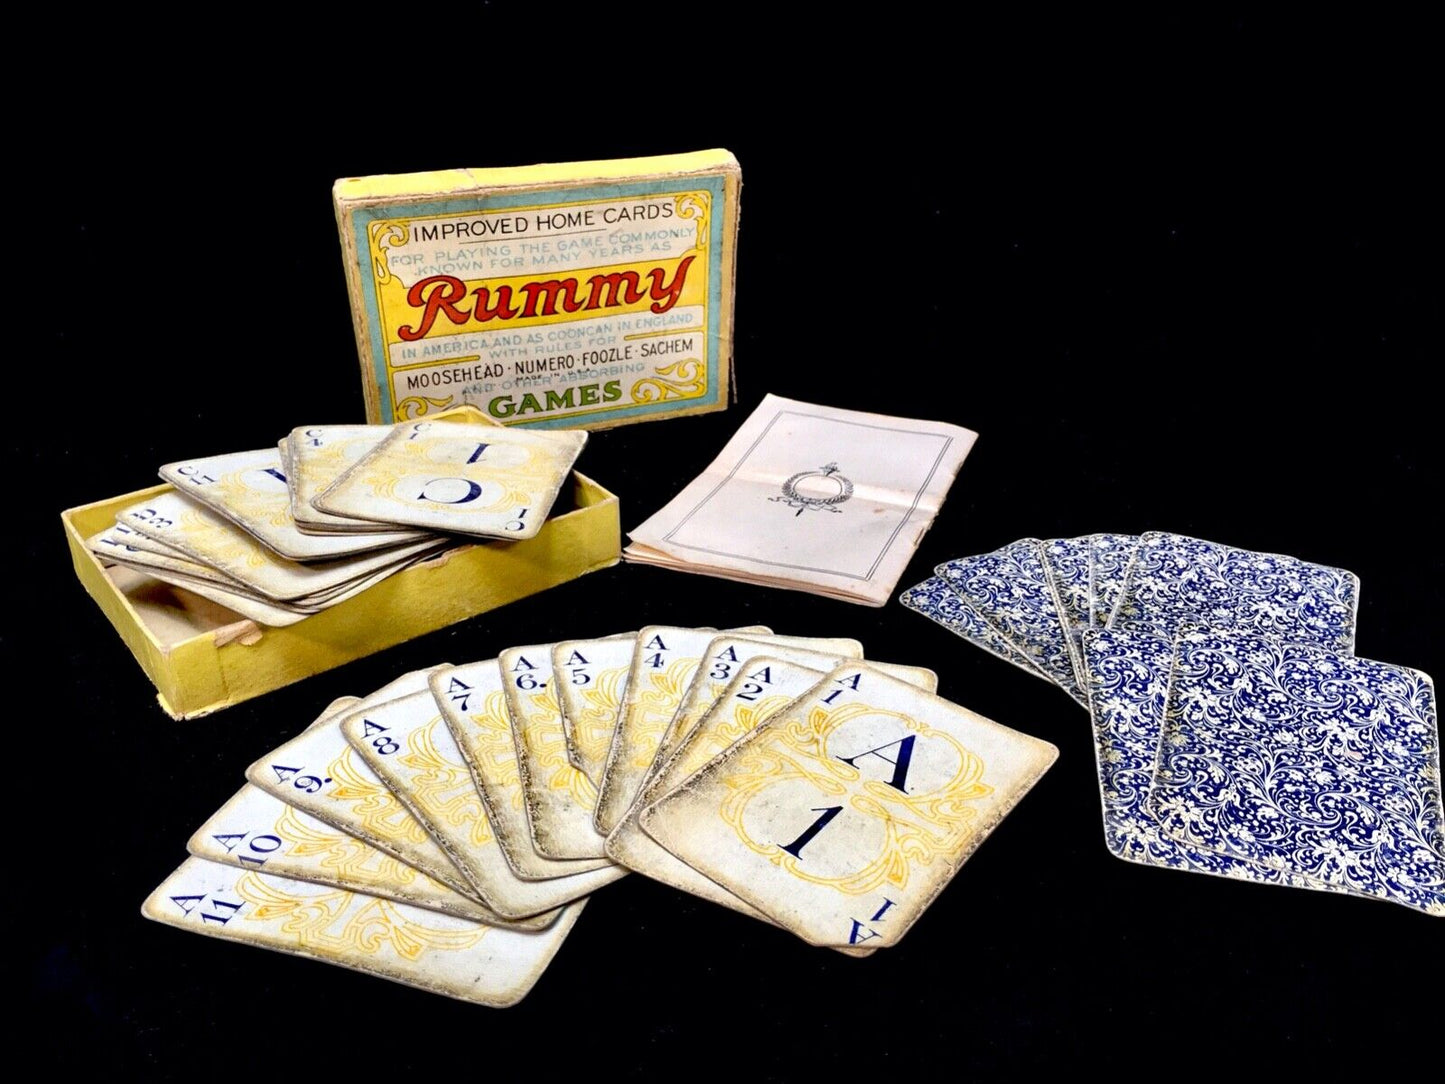 Antique Rummy Card Game Set by United Games Co. Manufactured in 1916 / Complete